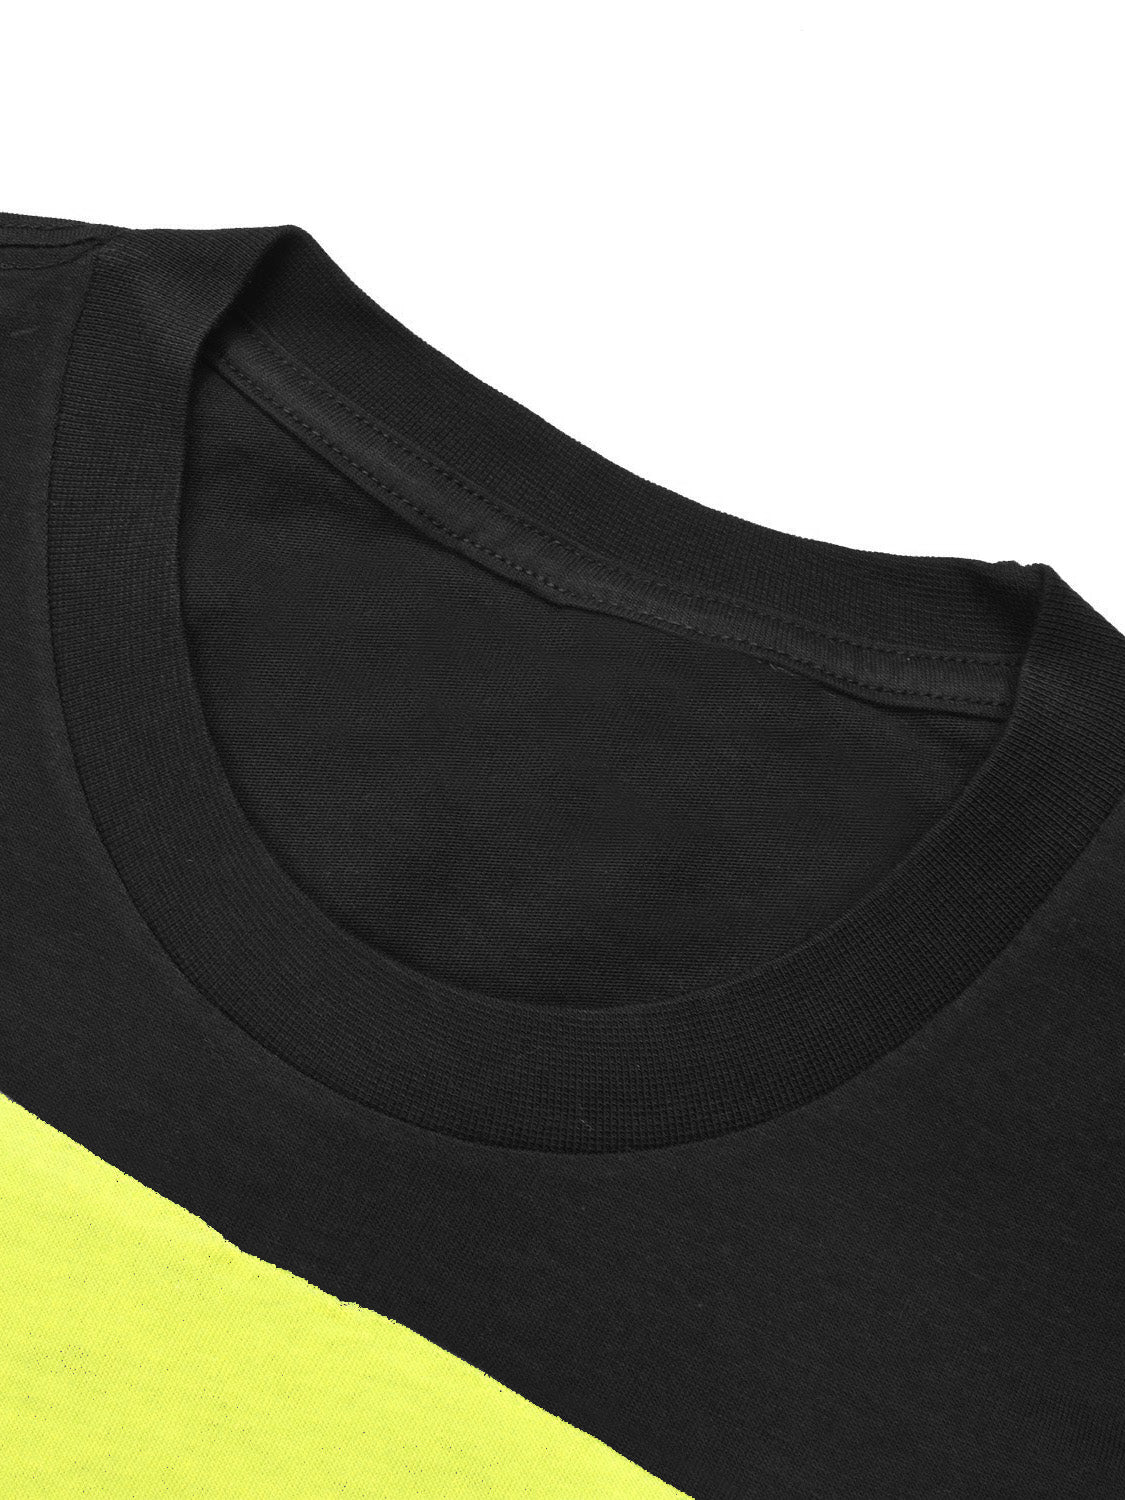 NK Crew Neck Single Jersey Tee Shirt For Kids-Black with Yellow Panels-SP2270